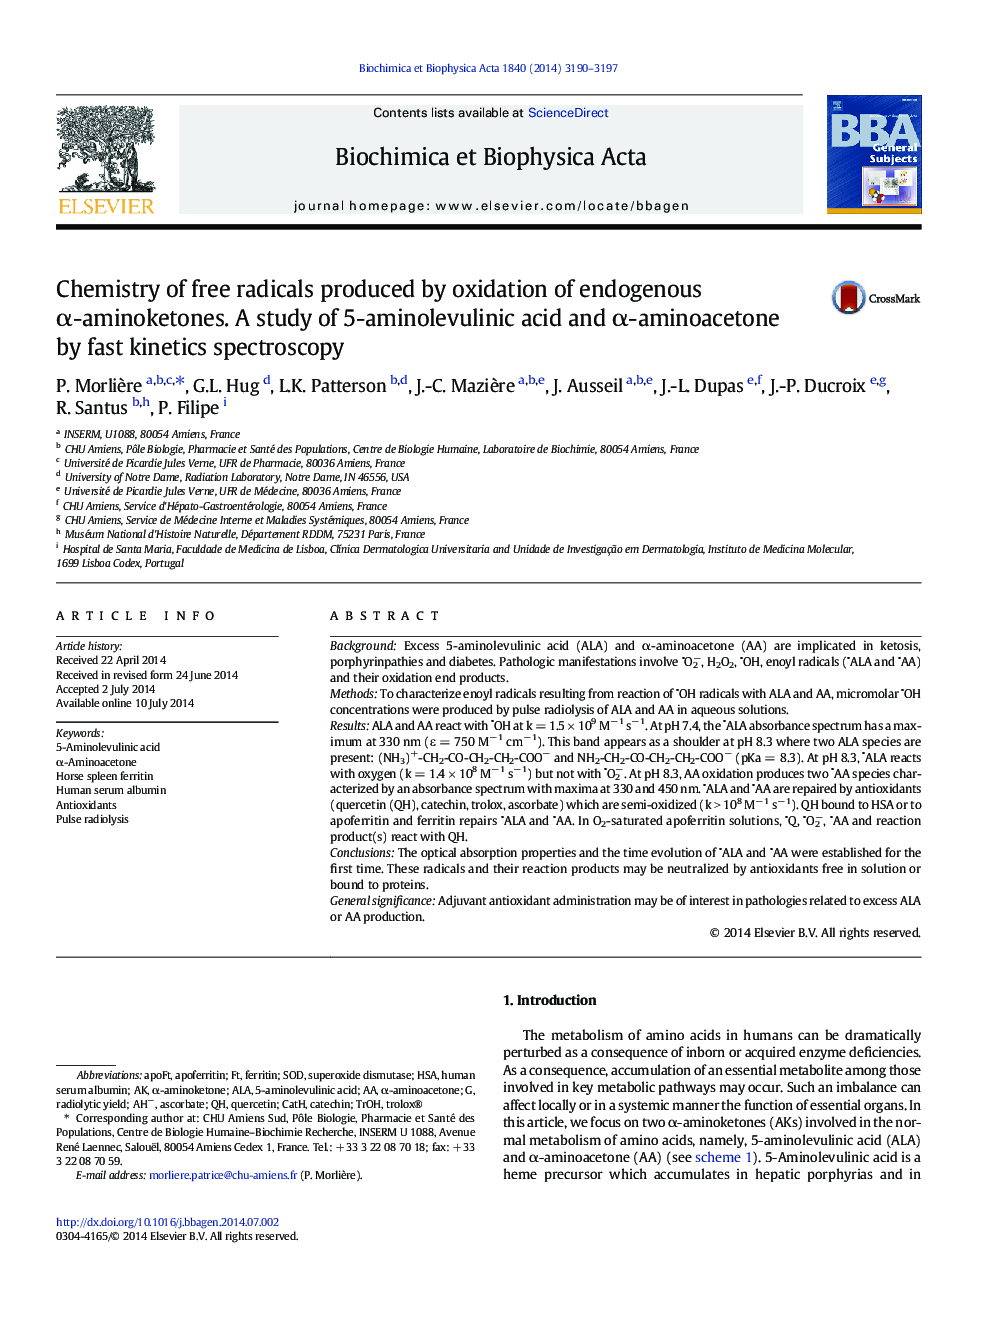 Chemistry of free radicals produced by oxidation of endogenous Î±-aminoketones. A study of 5-aminolevulinic acid and Î±-aminoacetone by fast kinetics spectroscopy